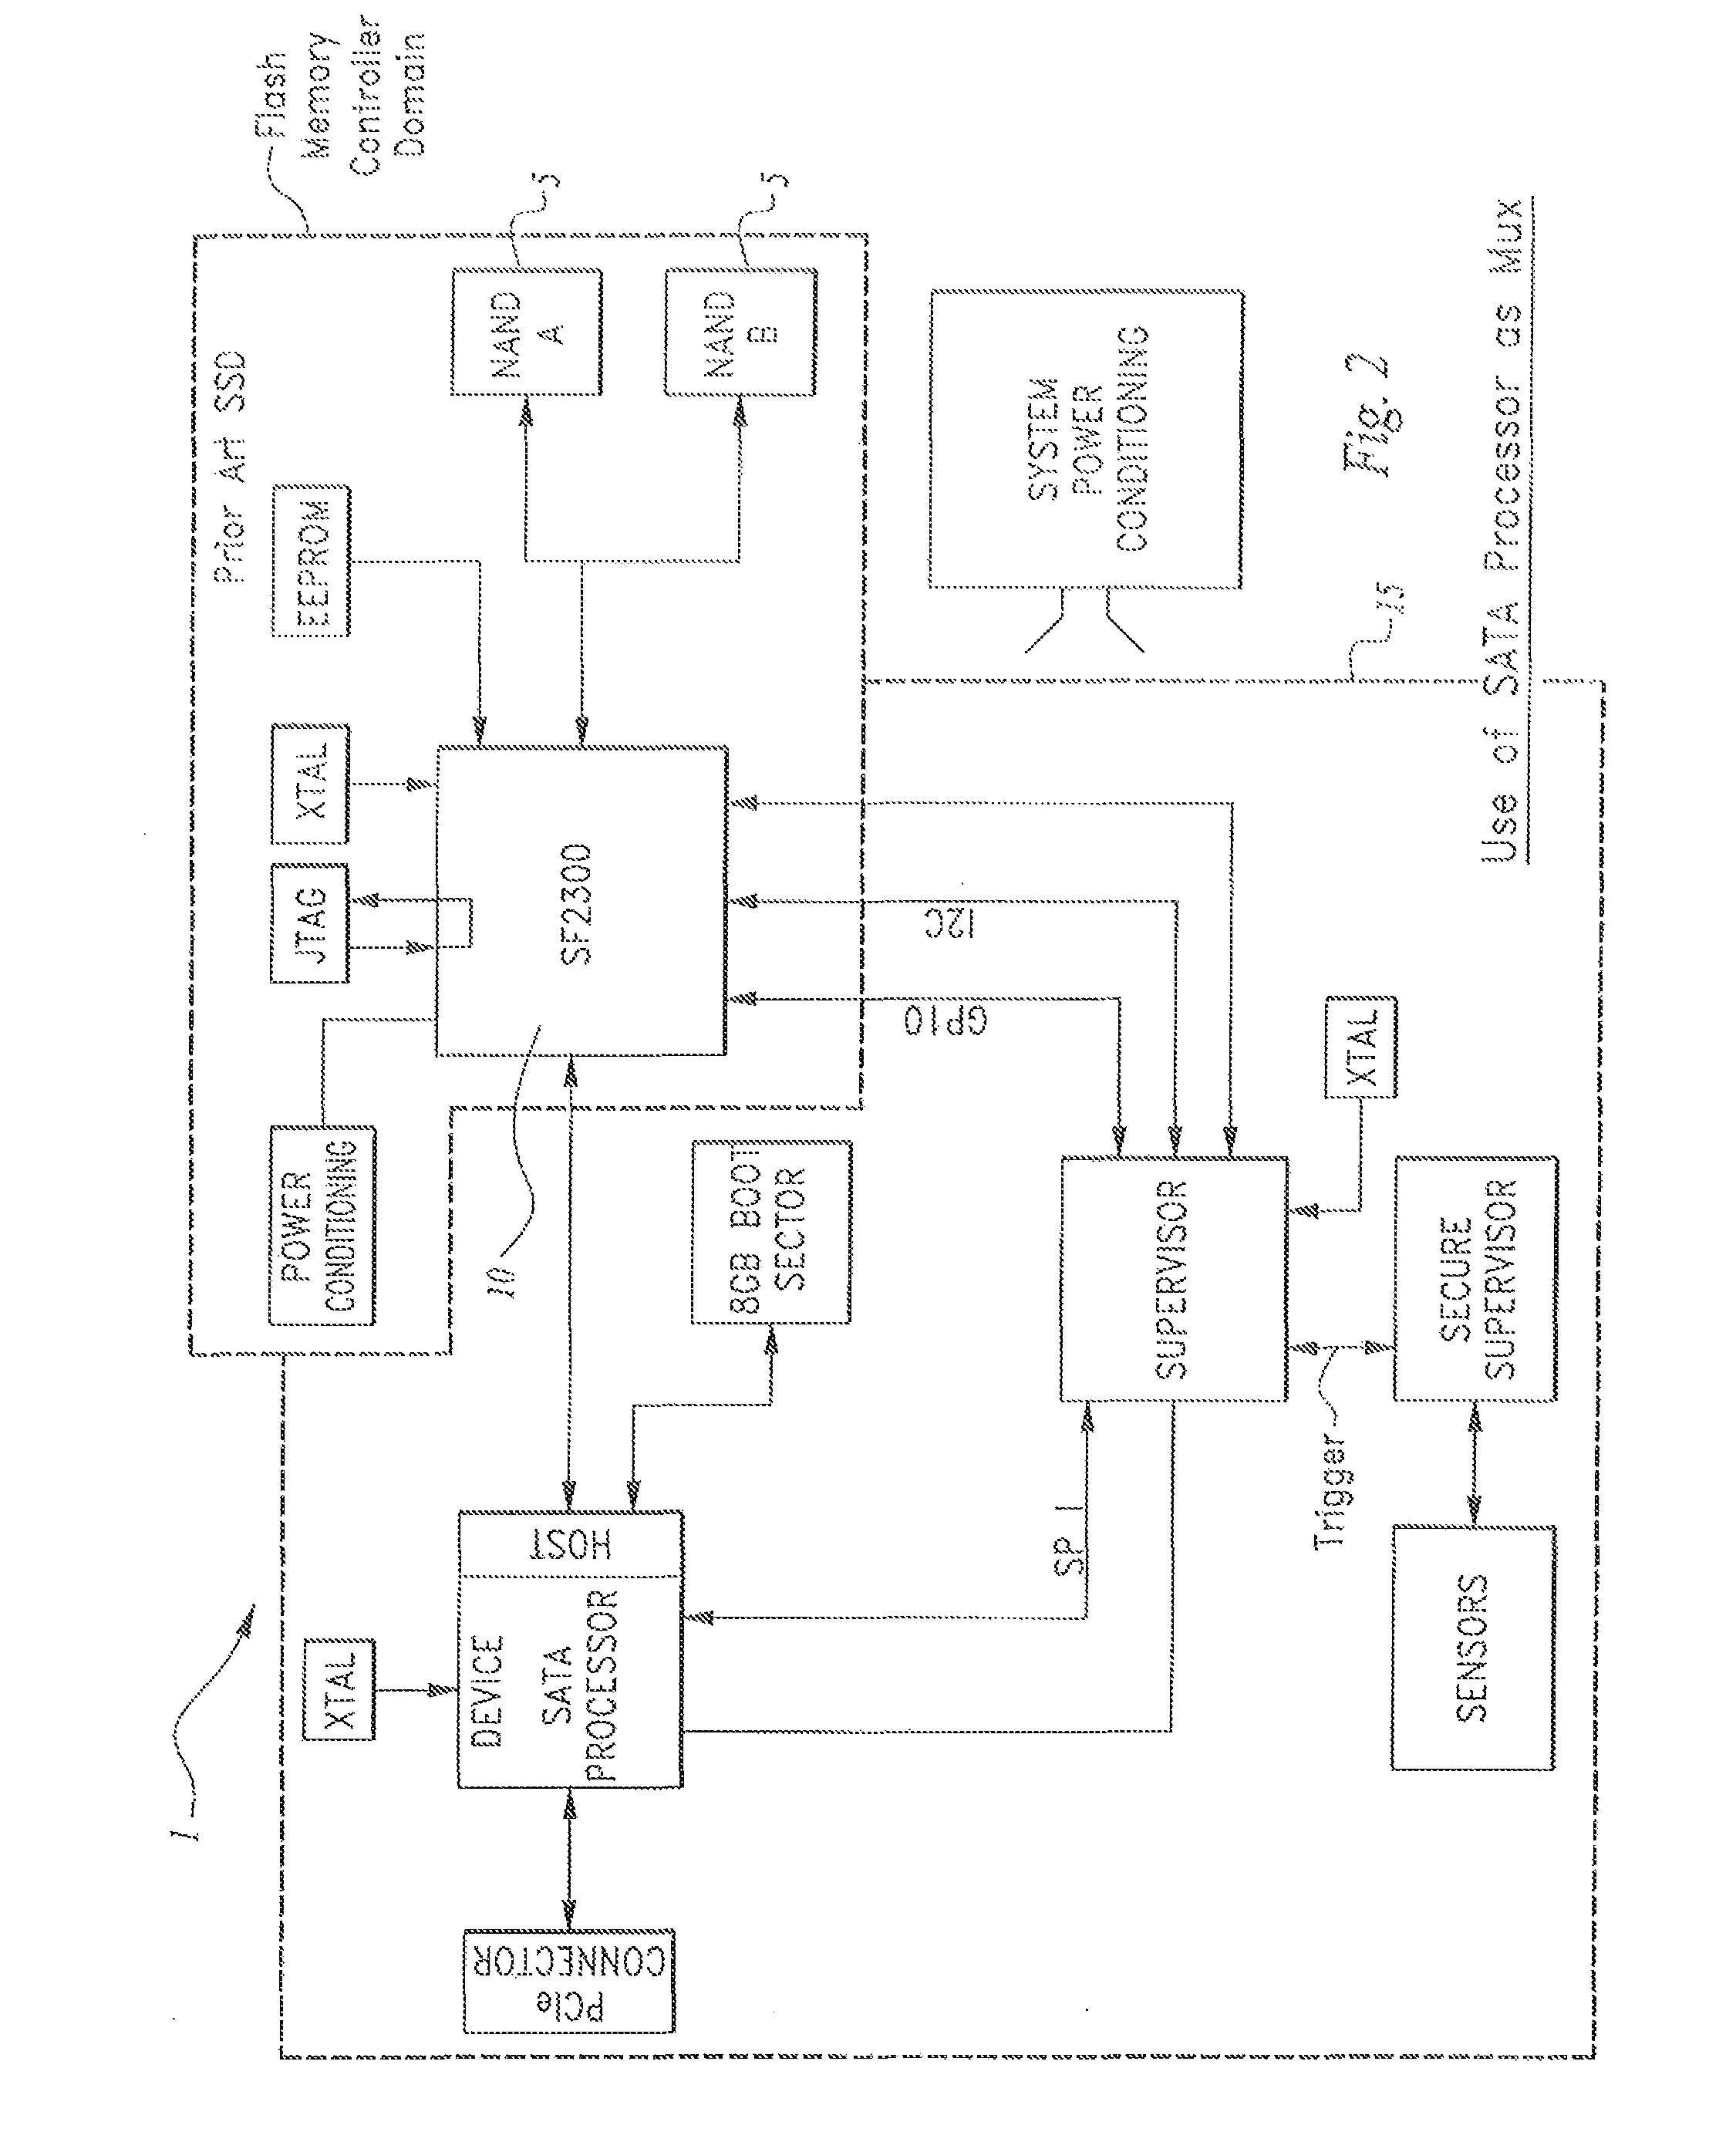 Solid state drive memory device comprising secure erase function